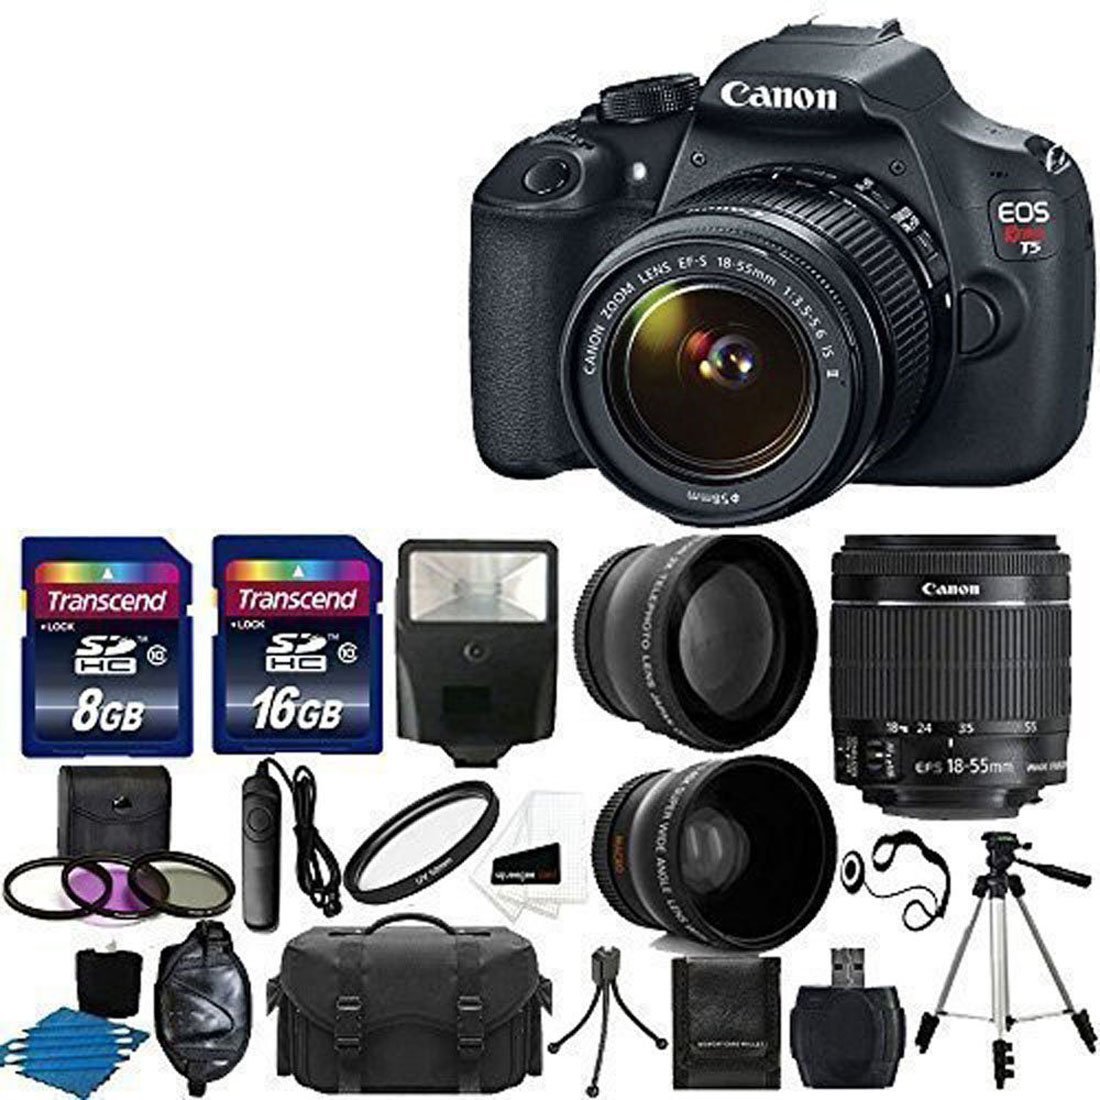 Canon EOS Rebel T5i Digital SLR Camera with EF-S 18-55mm f/3.5-5.6 IS Lens, 58mm 2x Lens, Wide Angle Lens and Complete Deluxe Accessory Bundle